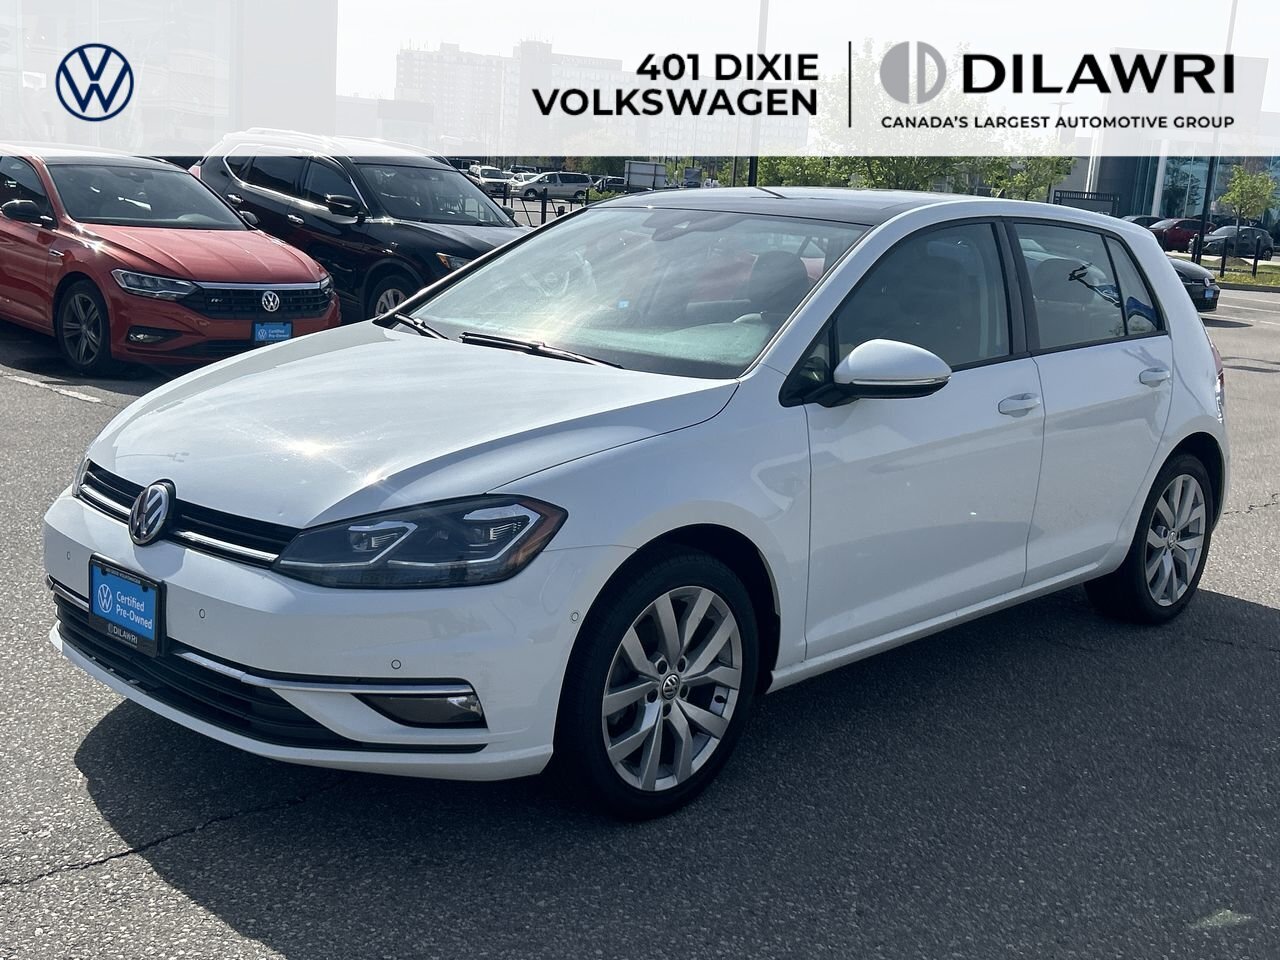 2019 Volkswagen Golf Execline Clean Carfax| Fully Loaded| Manual Transm